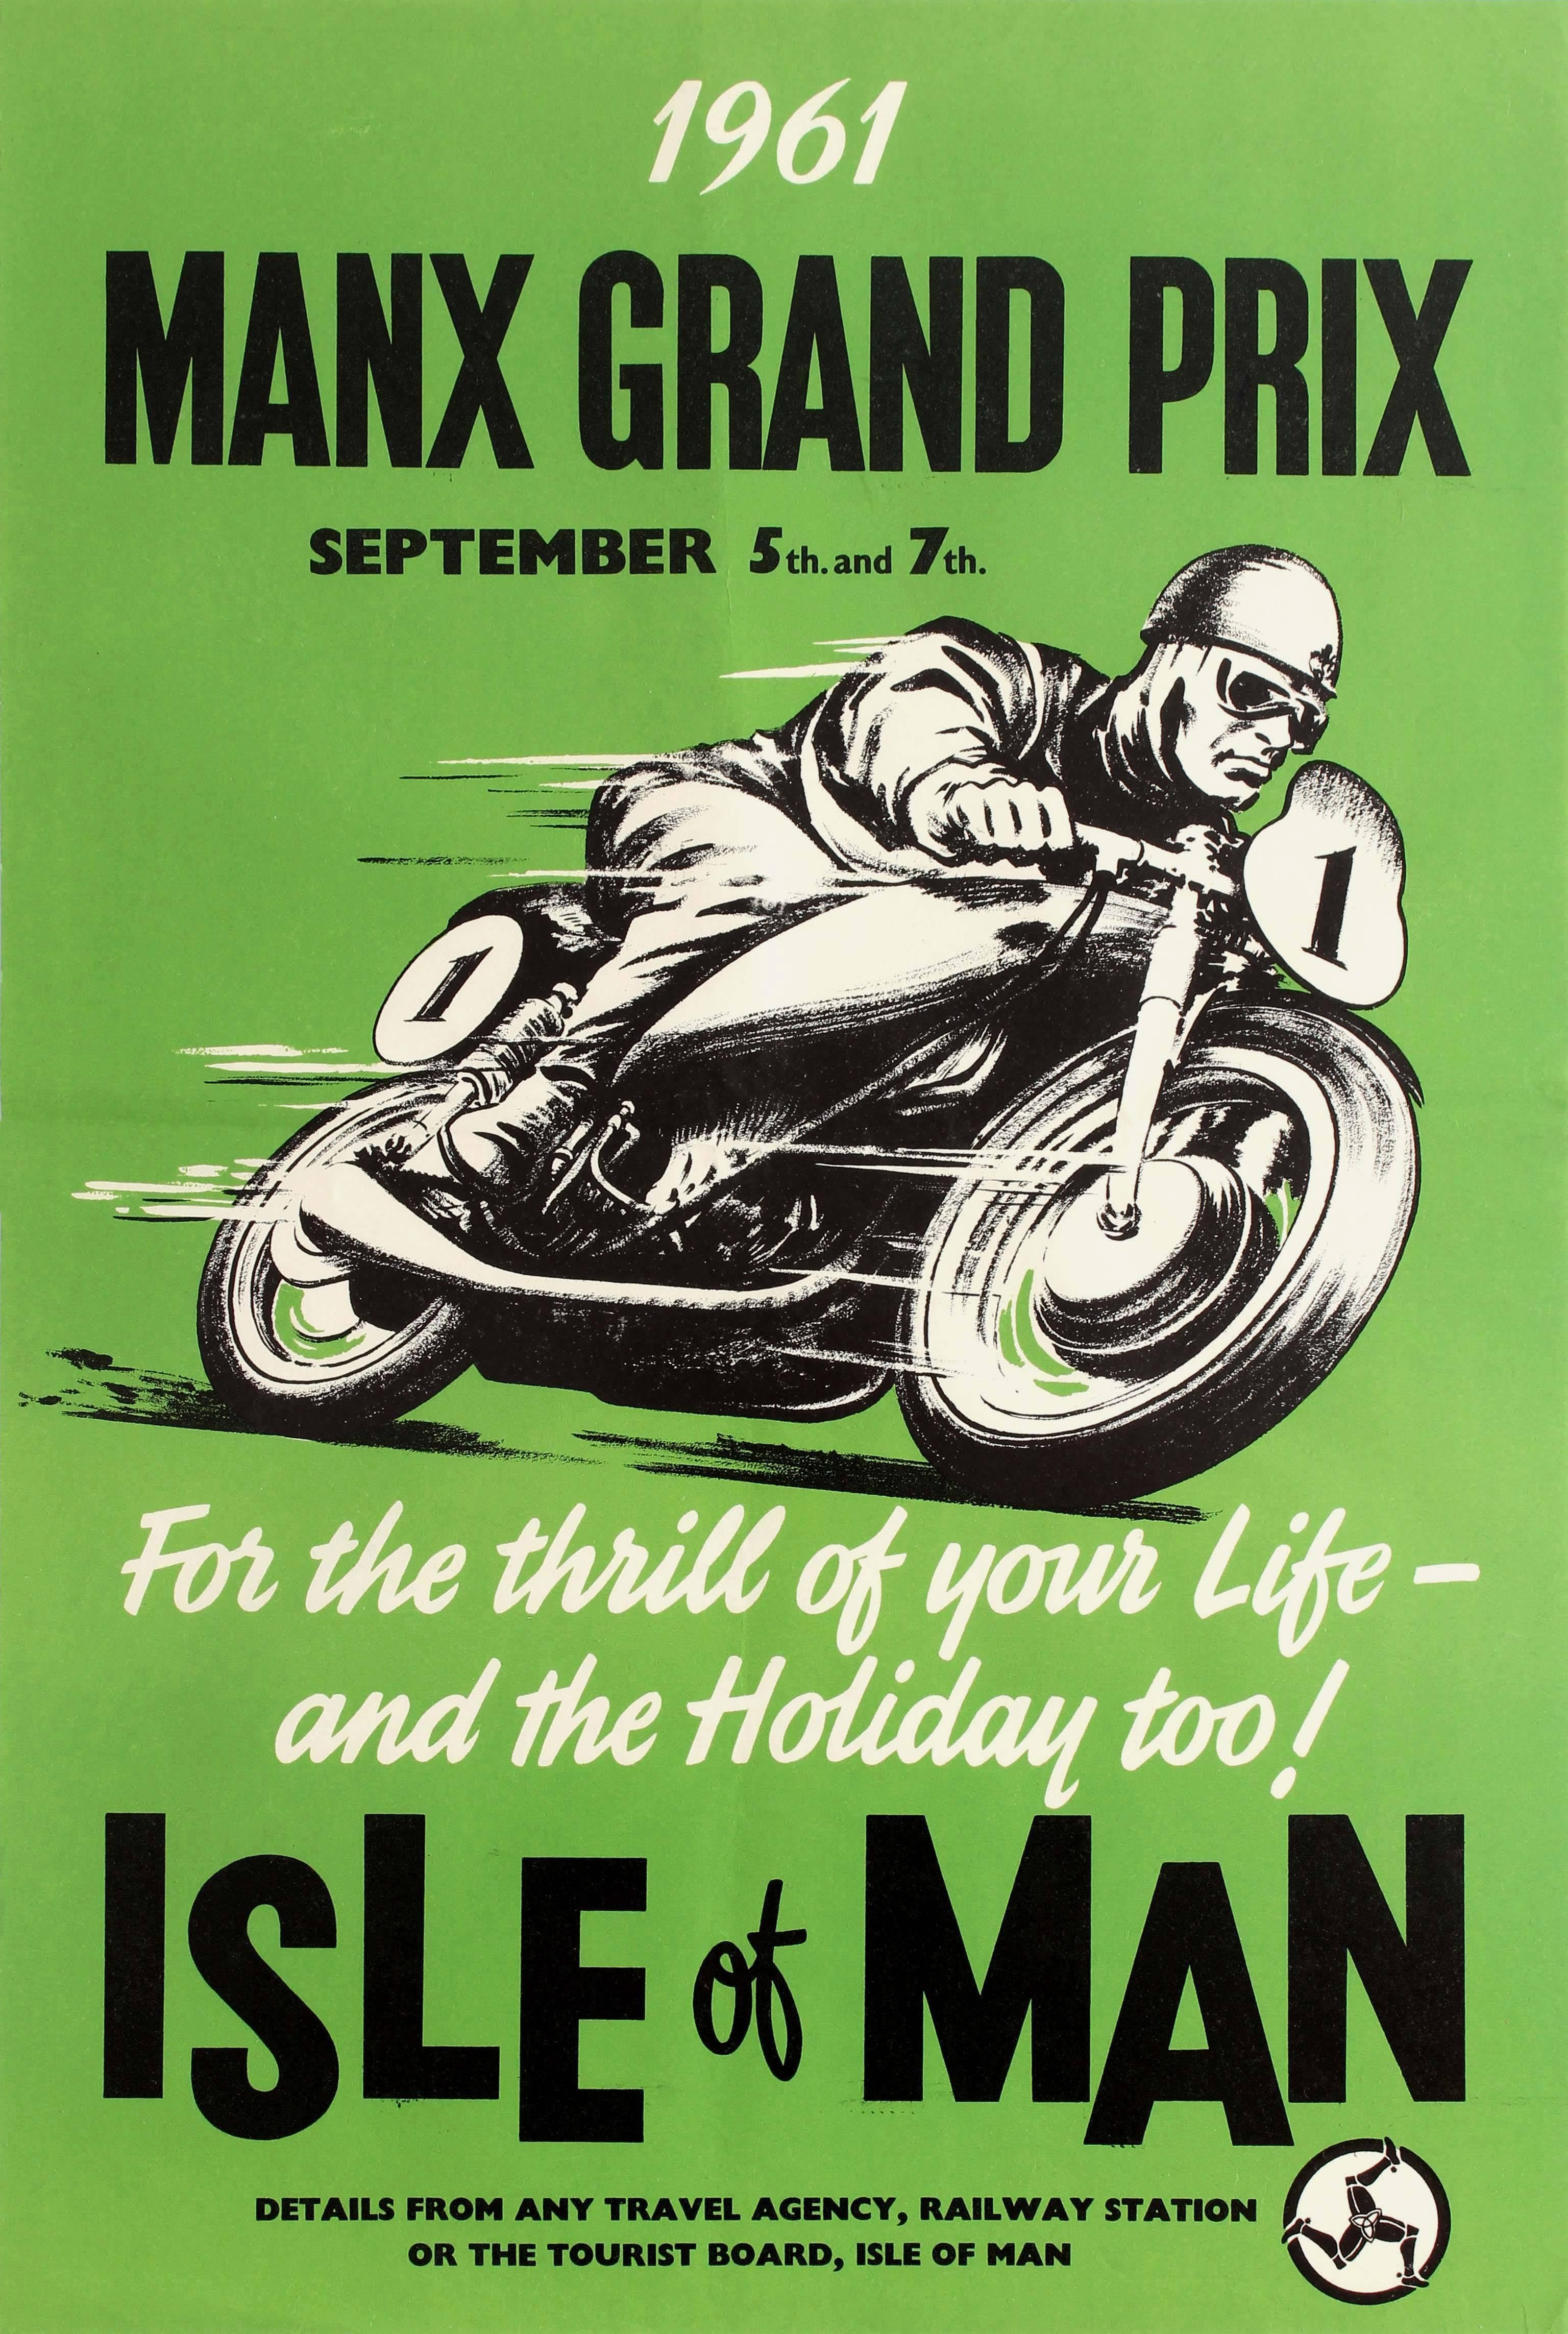 Unknown Print - Original Vintage Manx Grand Prix Motorcycle Poster - For The Thrill Of Your Life